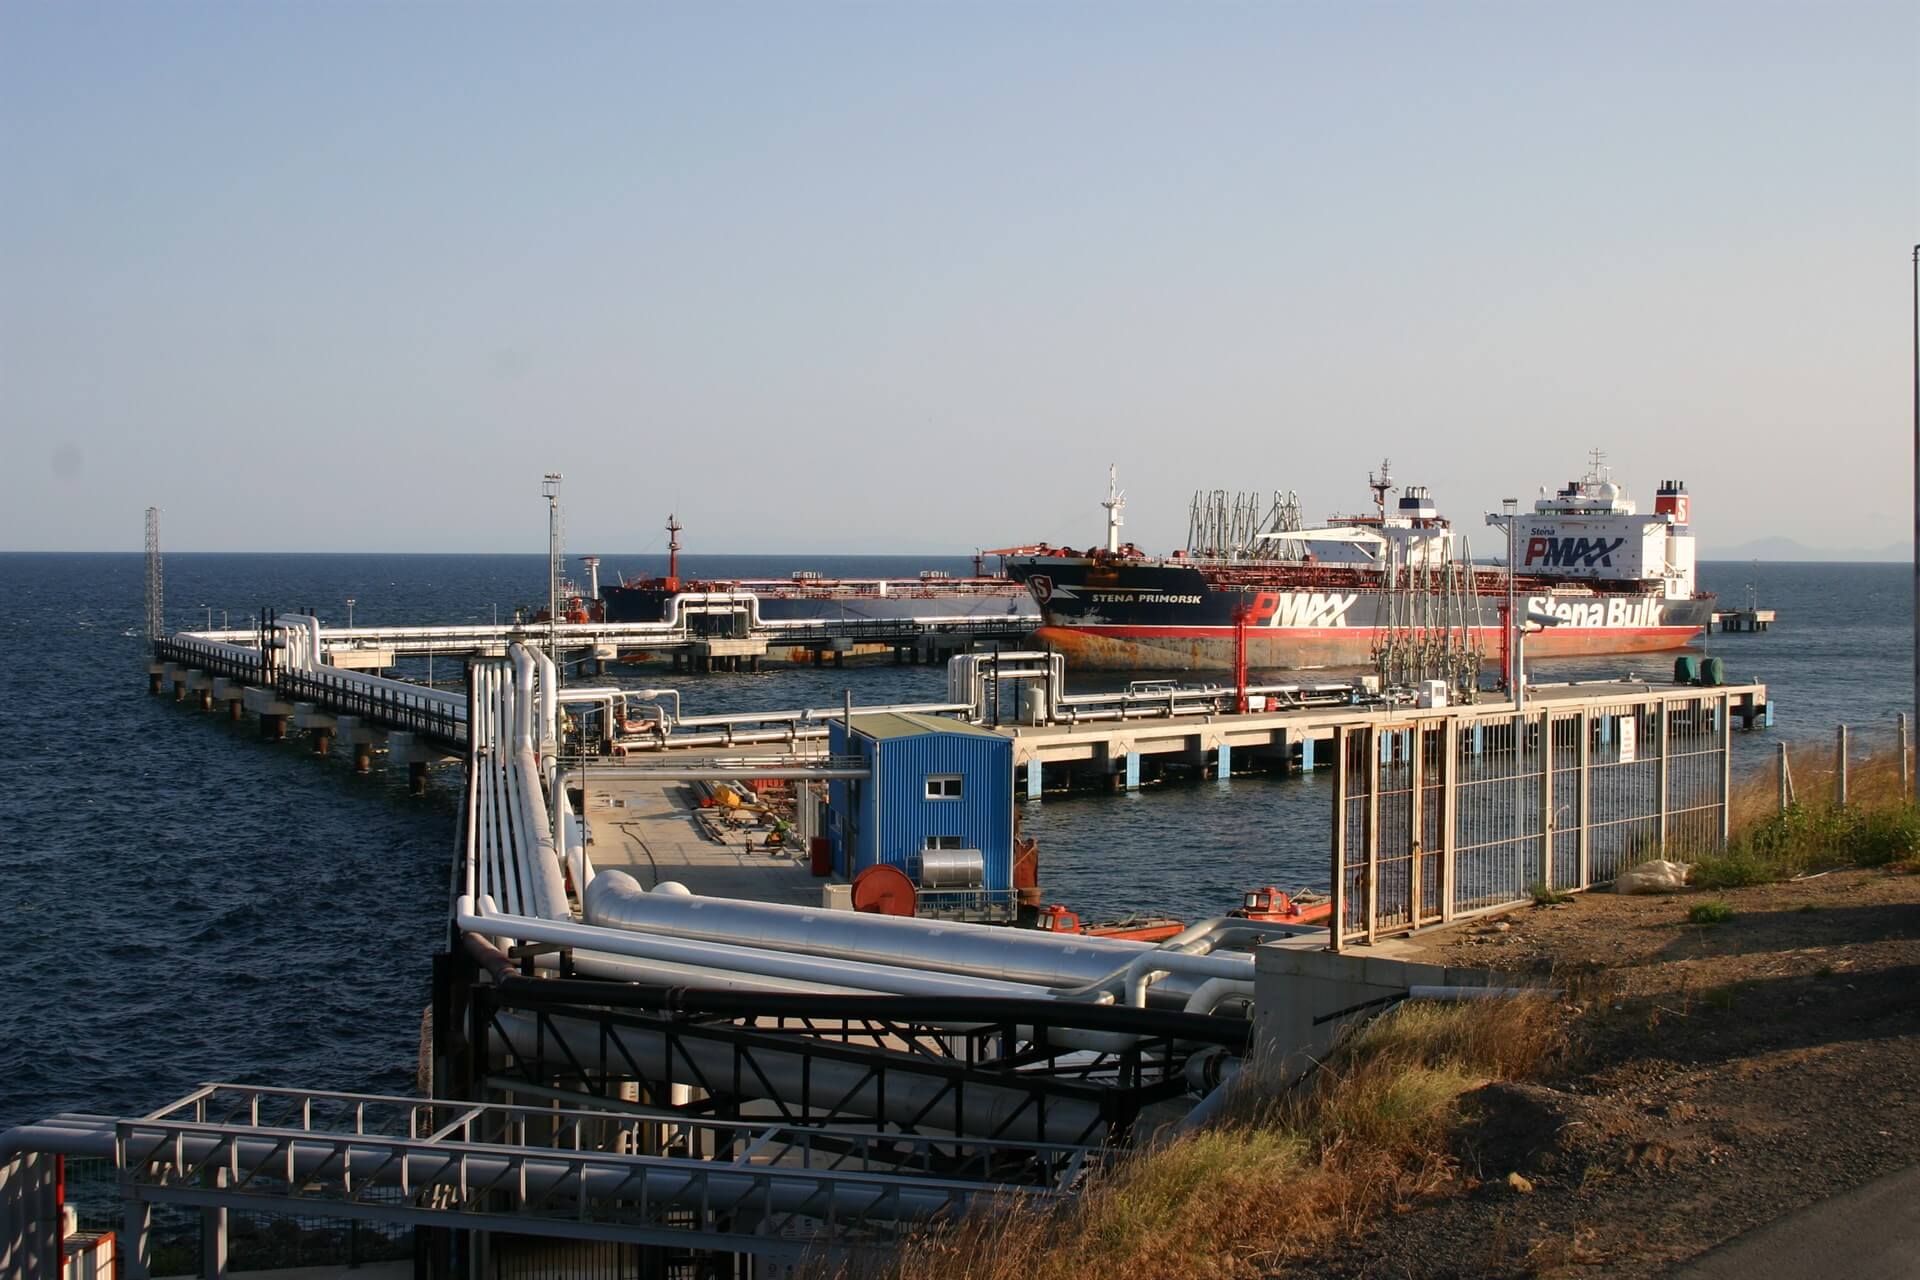 Opet Loading - Unloading Sea Platforms and Jetty